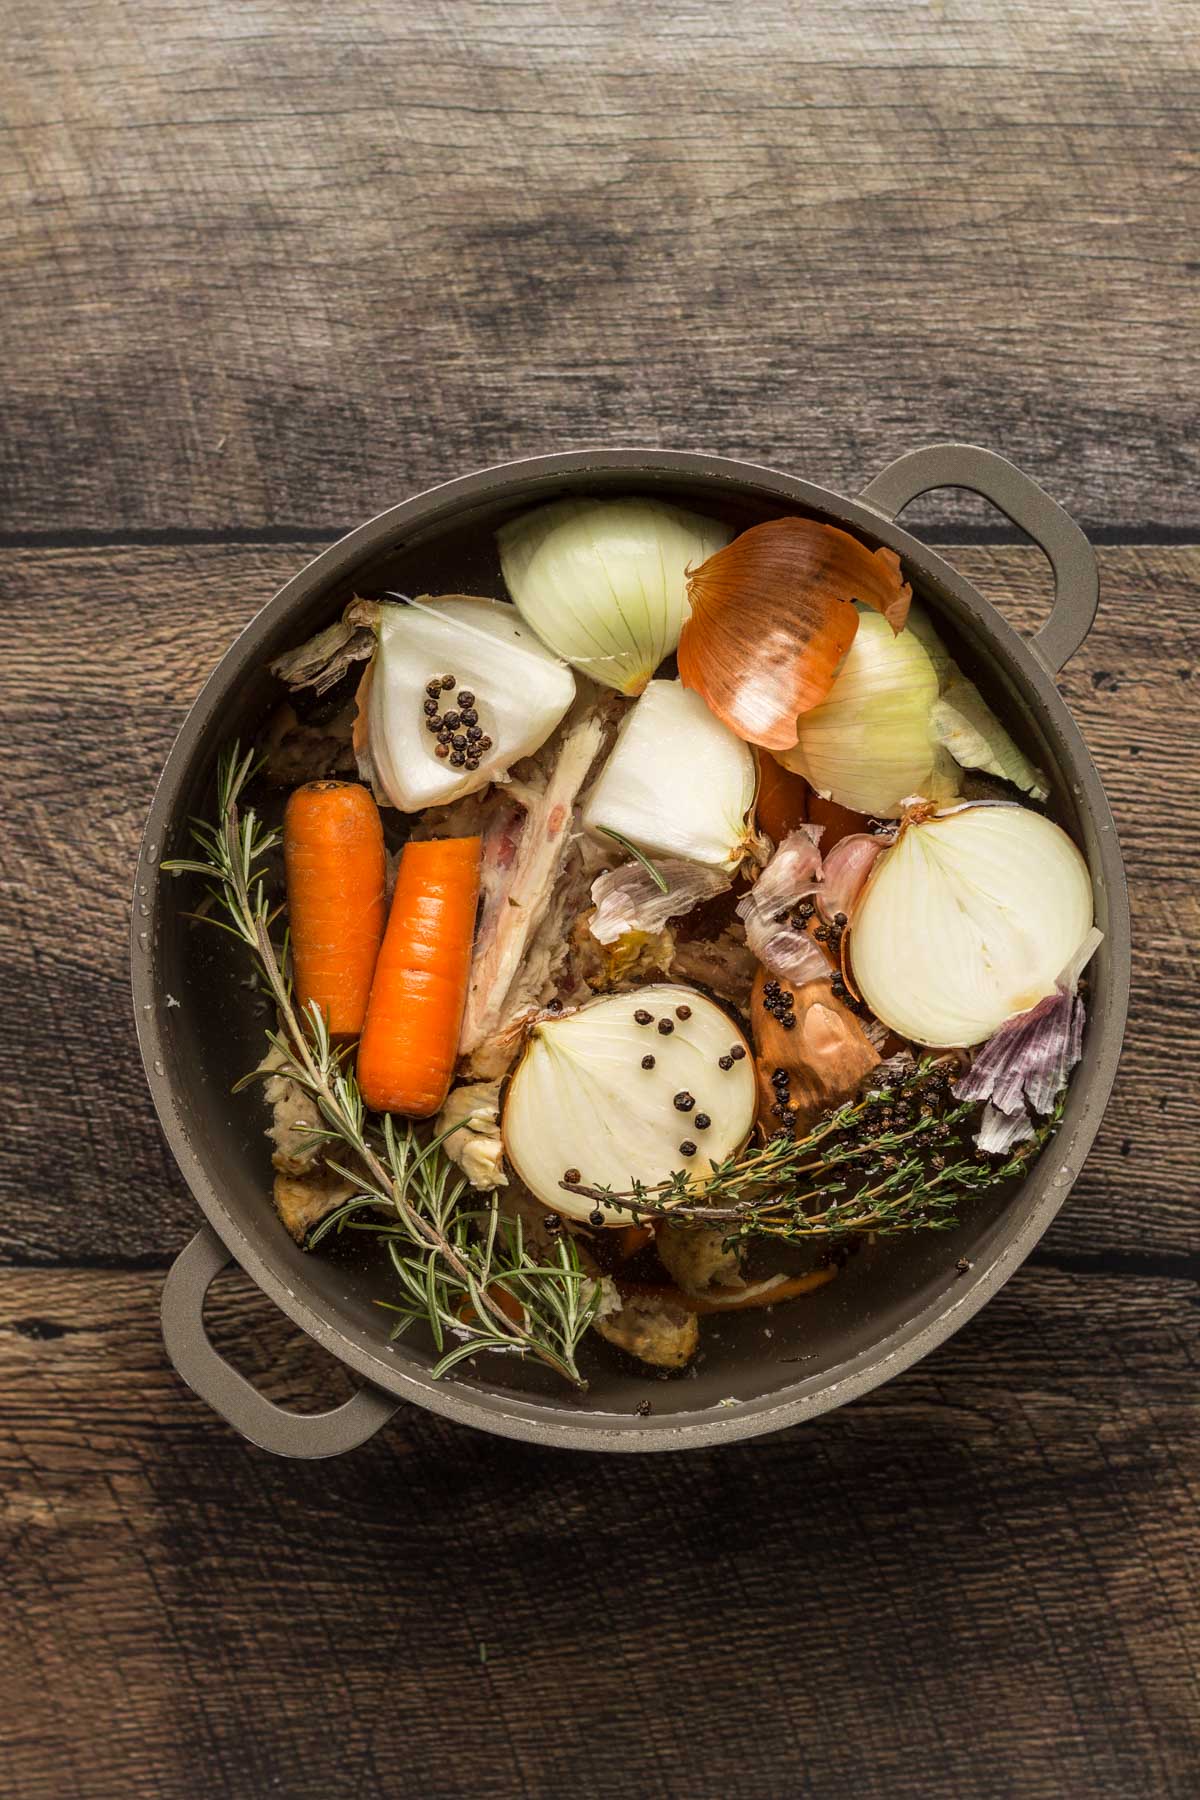 Onions, carrots, and herbs in a stock pot